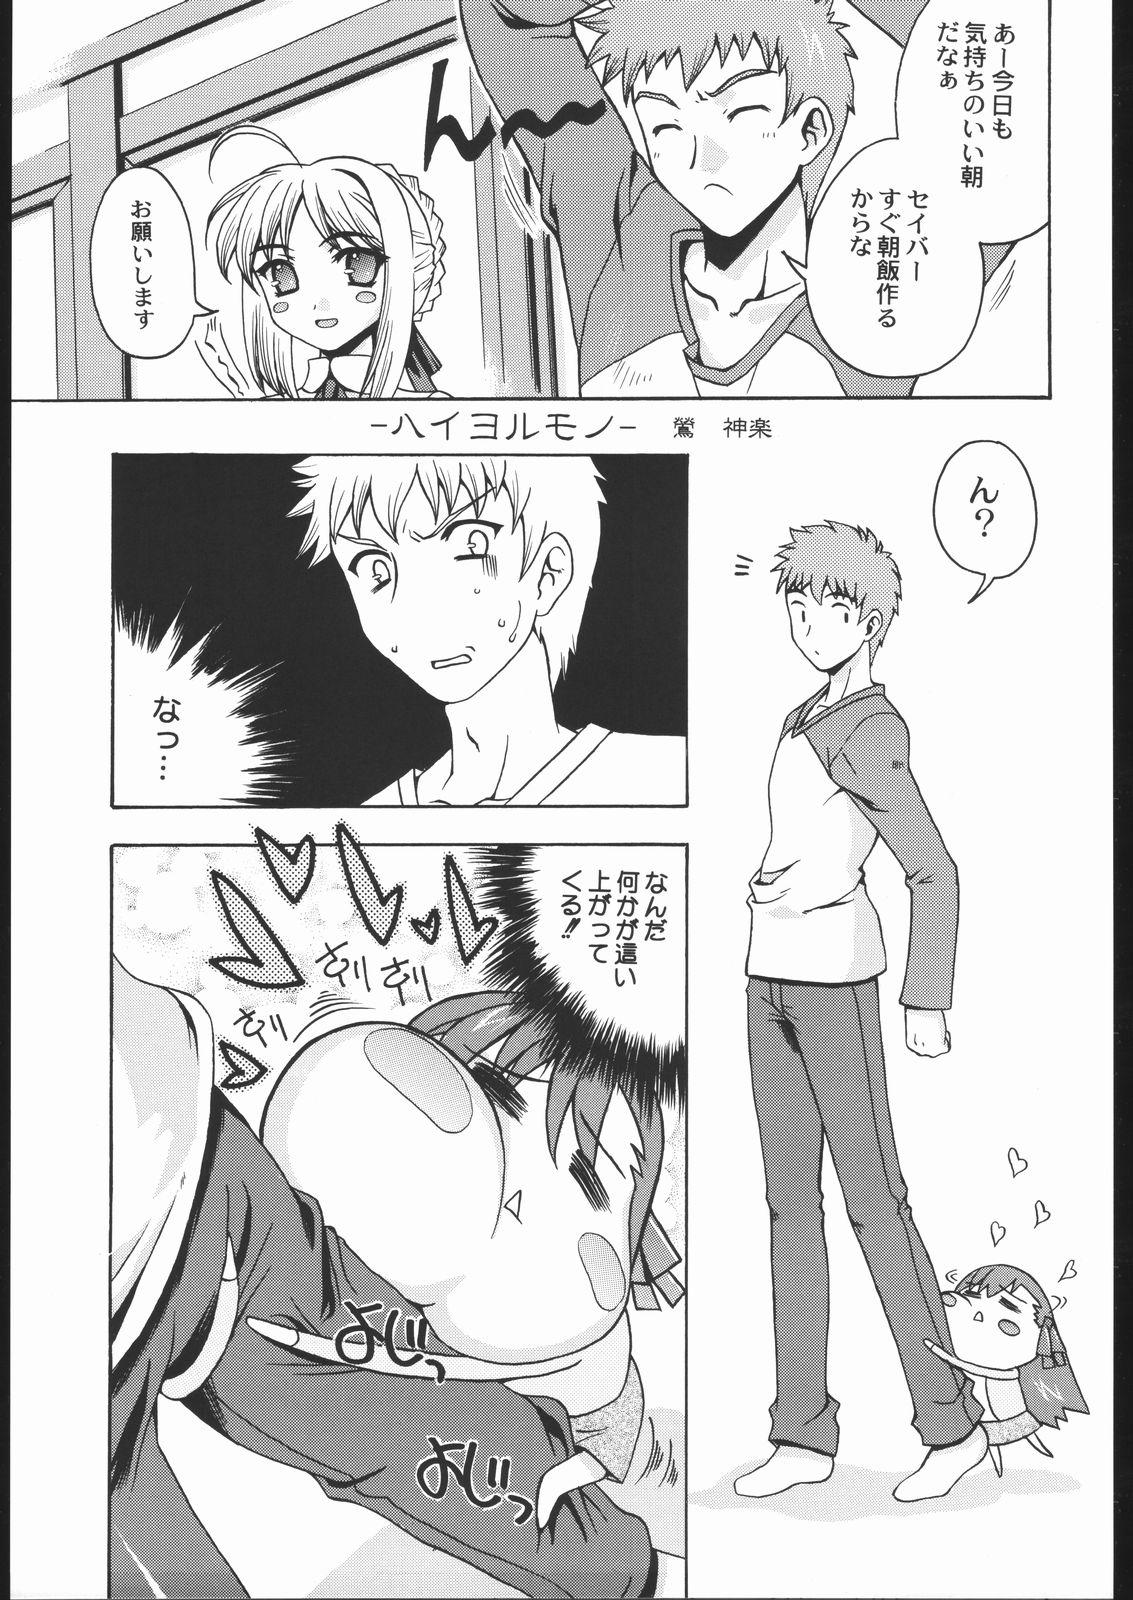 Rubdown Going My Way - Fate stay night Trimmed - Page 4